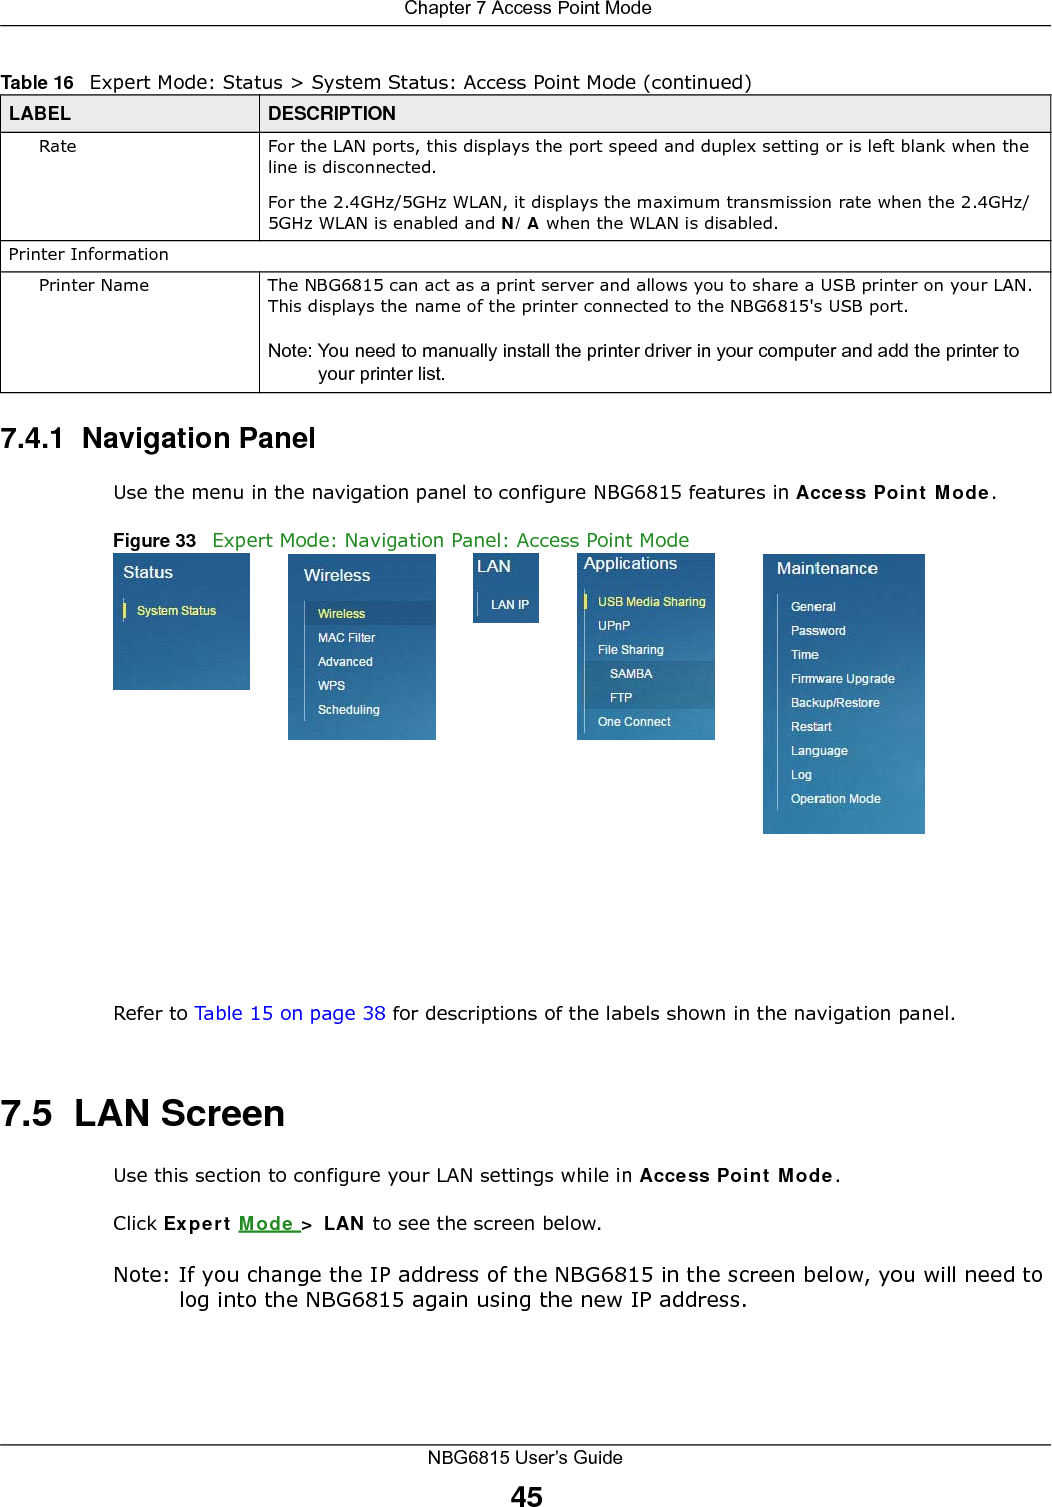  Chapter 7 Access Point ModeNBG6815 User’s Guide457.4.1  Navigation PanelUse the menu in the navigation panel to configure NBG6815 features in Access Point Mode.Figure 33   Expert Mode: Navigation Panel: Access Point Mode Refer to Table 15 on page 38 for descriptions of the labels shown in the navigation panel.7.5  LAN ScreenUse this section to configure your LAN settings while in Access Point Mode. Click Expert Mode &gt; LAN to see the screen below.Note: If you change the IP address of the NBG6815 in the screen below, you will need to log into the NBG6815 again using the new IP address.Rate For the LAN ports, this displays the port speed and duplex setting or is left blank when the line is disconnected.For the 2.4GHz/5GHz WLAN, it displays the maximum transmission rate when the 2.4GHz/5GHz WLAN is enabled and N/A when the WLAN is disabled.Printer InformationPrinter Name The NBG6815 can act as a print server and allows you to share a USB printer on your LAN. This displays the name of the printer connected to the NBG6815&apos;s USB port.Note: You need to manually install the printer driver in your computer and add the printer to your printer list.Table 16   Expert Mode: Status &gt; System Status: Access Point Mode (continued) LABEL DESCRIPTION